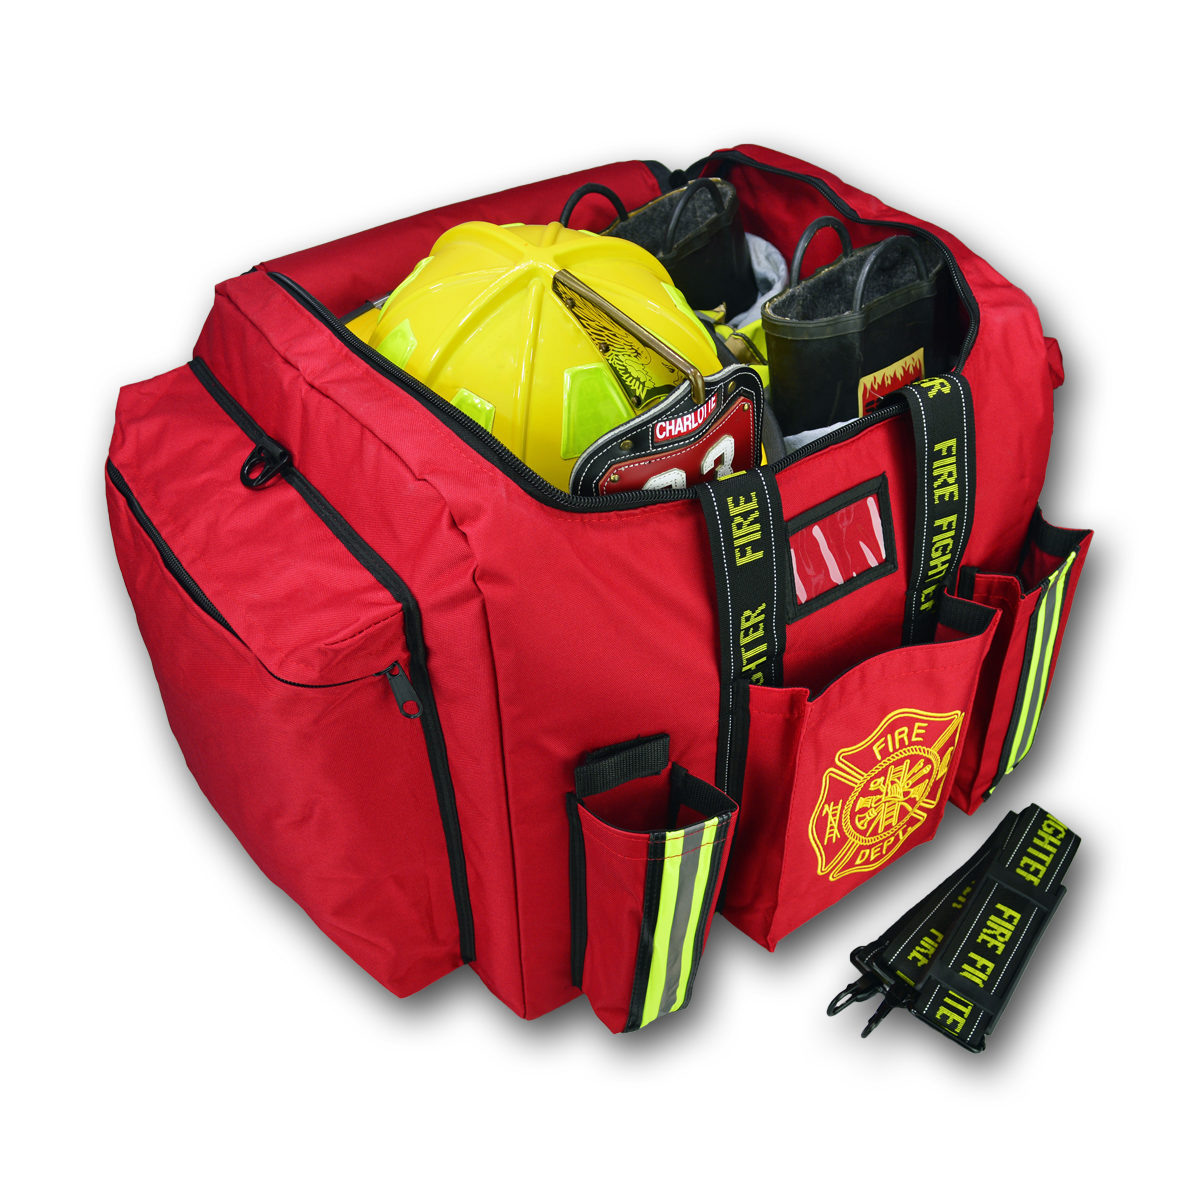 LXFB20 Premium Padded Step-In Turnout Gear Bag